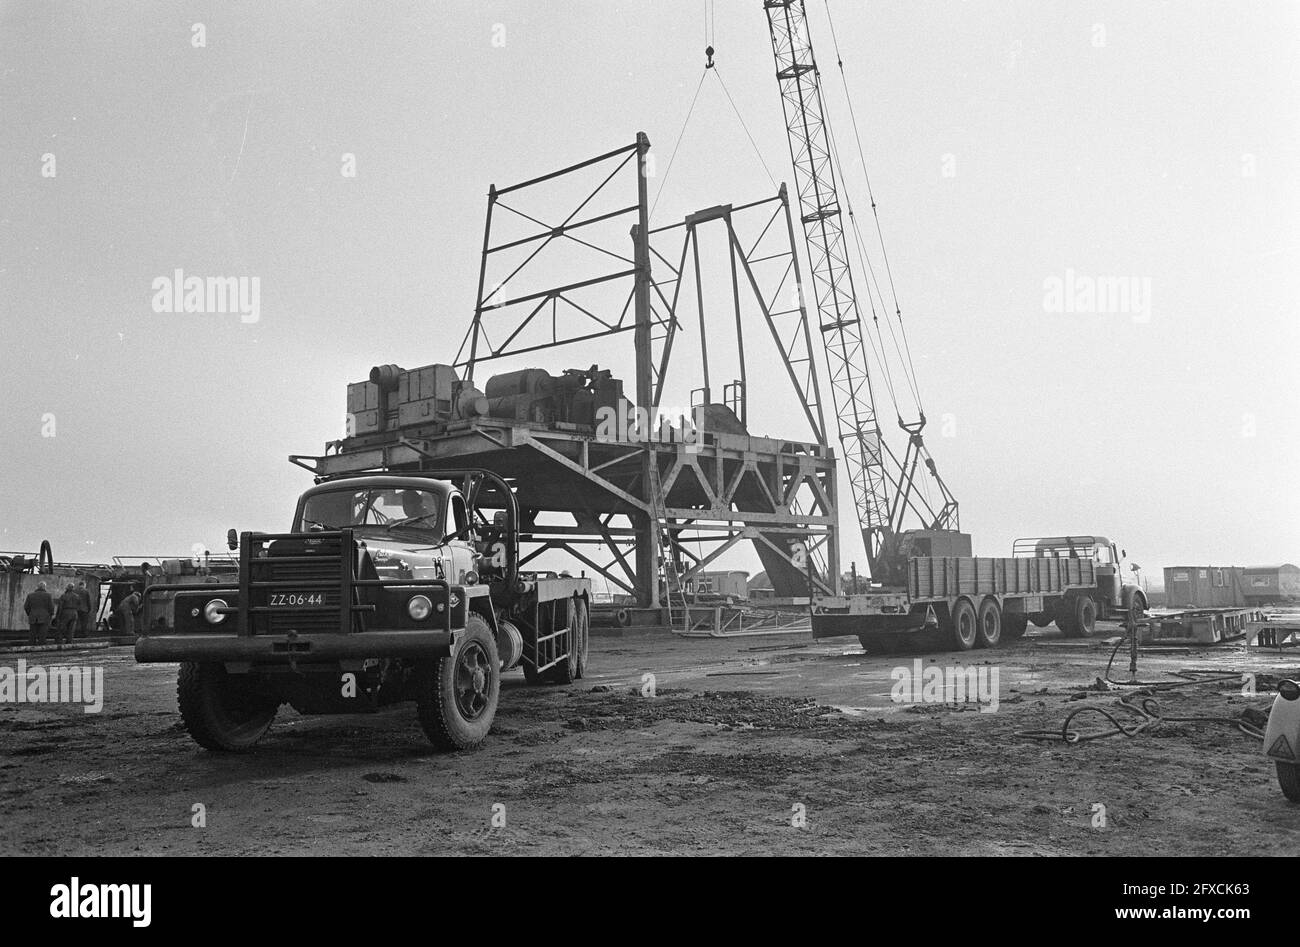 Drilling operation Black and White Stock Photos & Images - Alamy